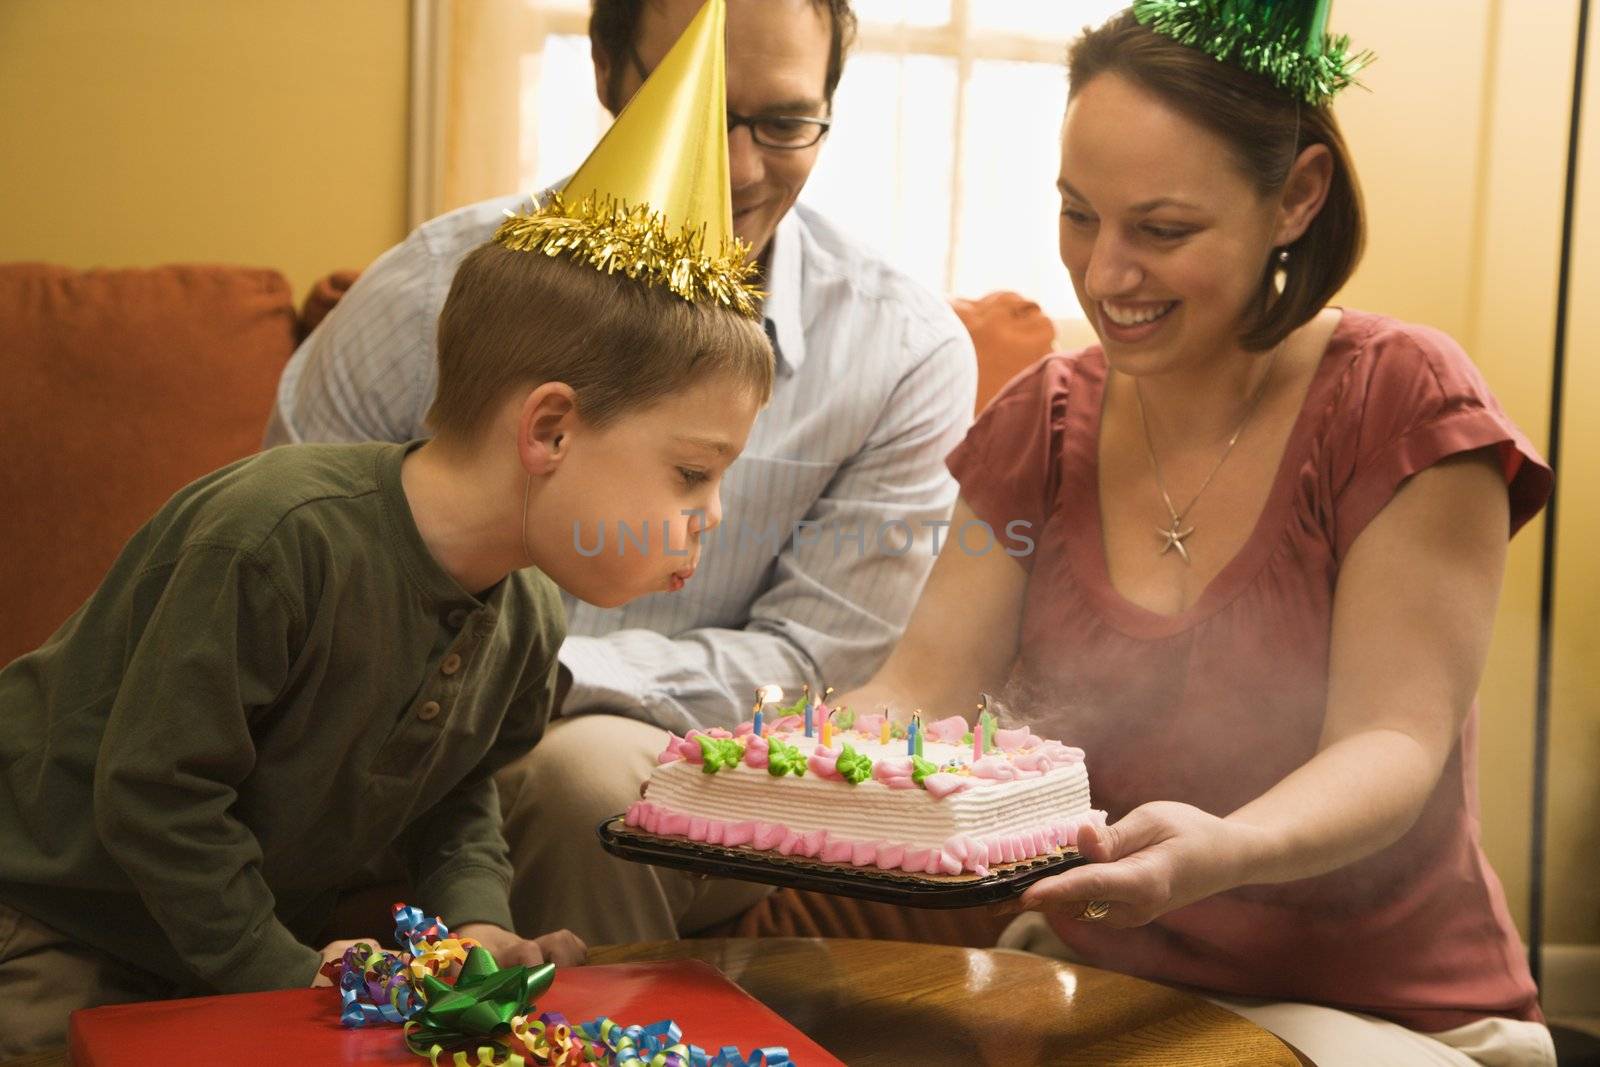 Caucasian boy in party hat blowing out candles on birthday cake with family watching.